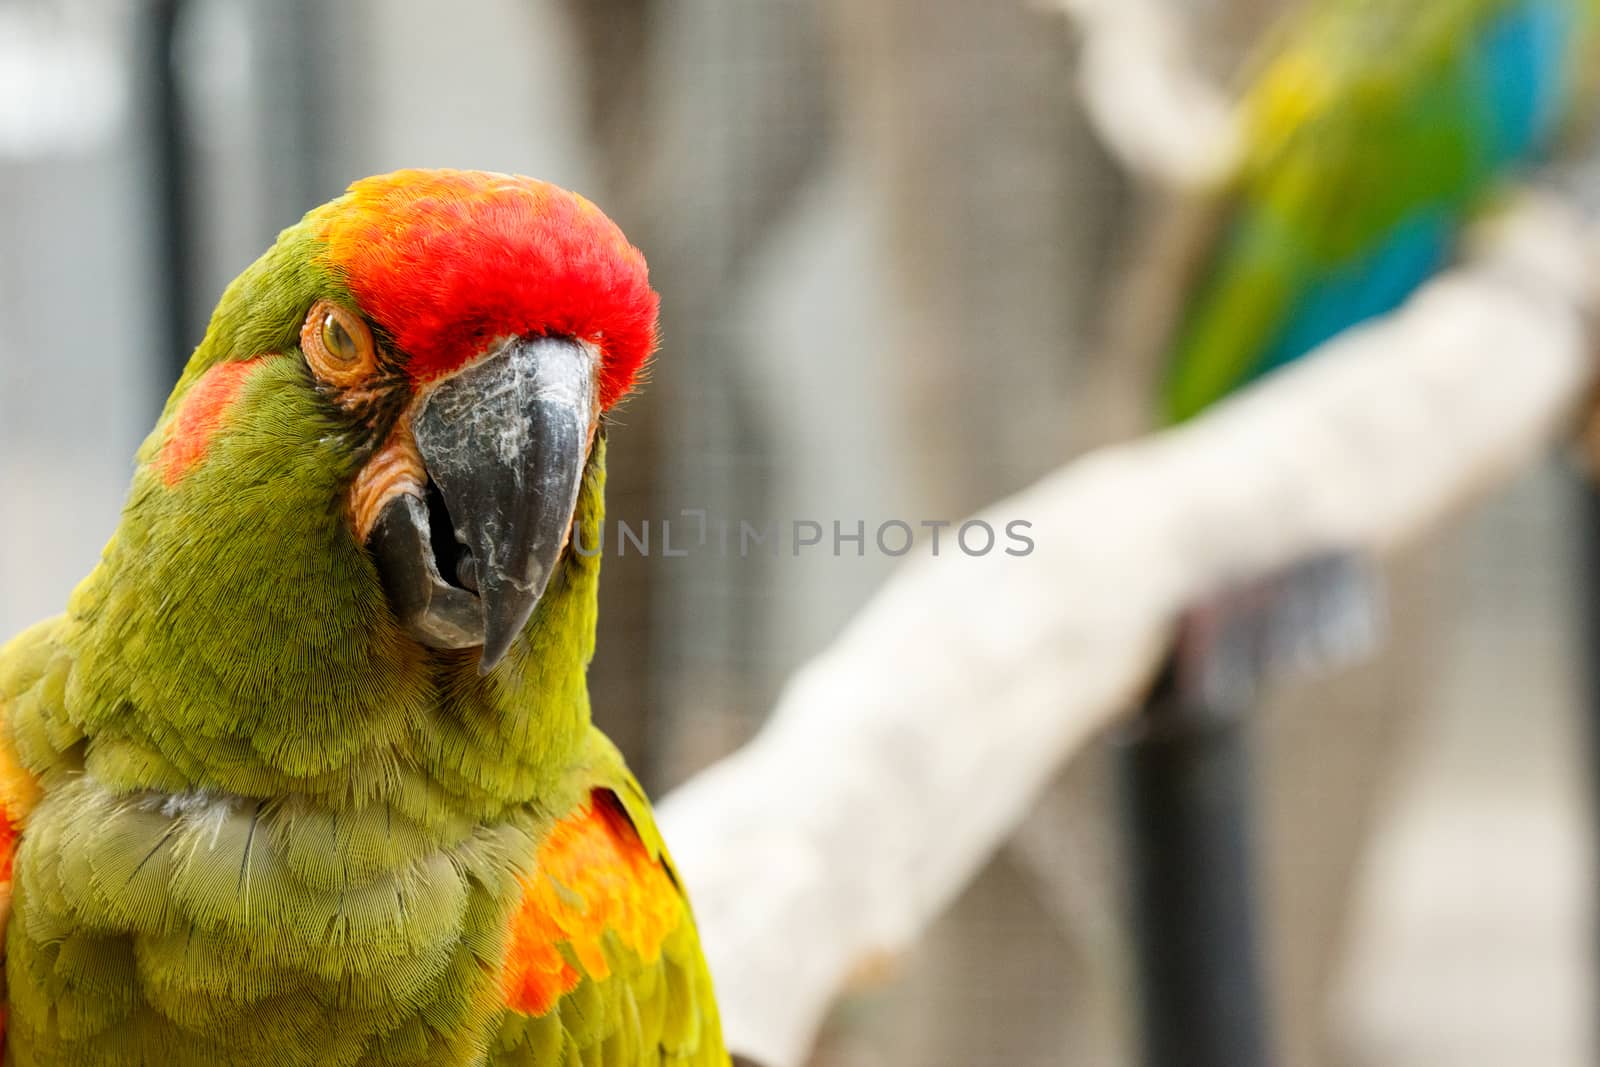 Parrot with an attitude by markdescande